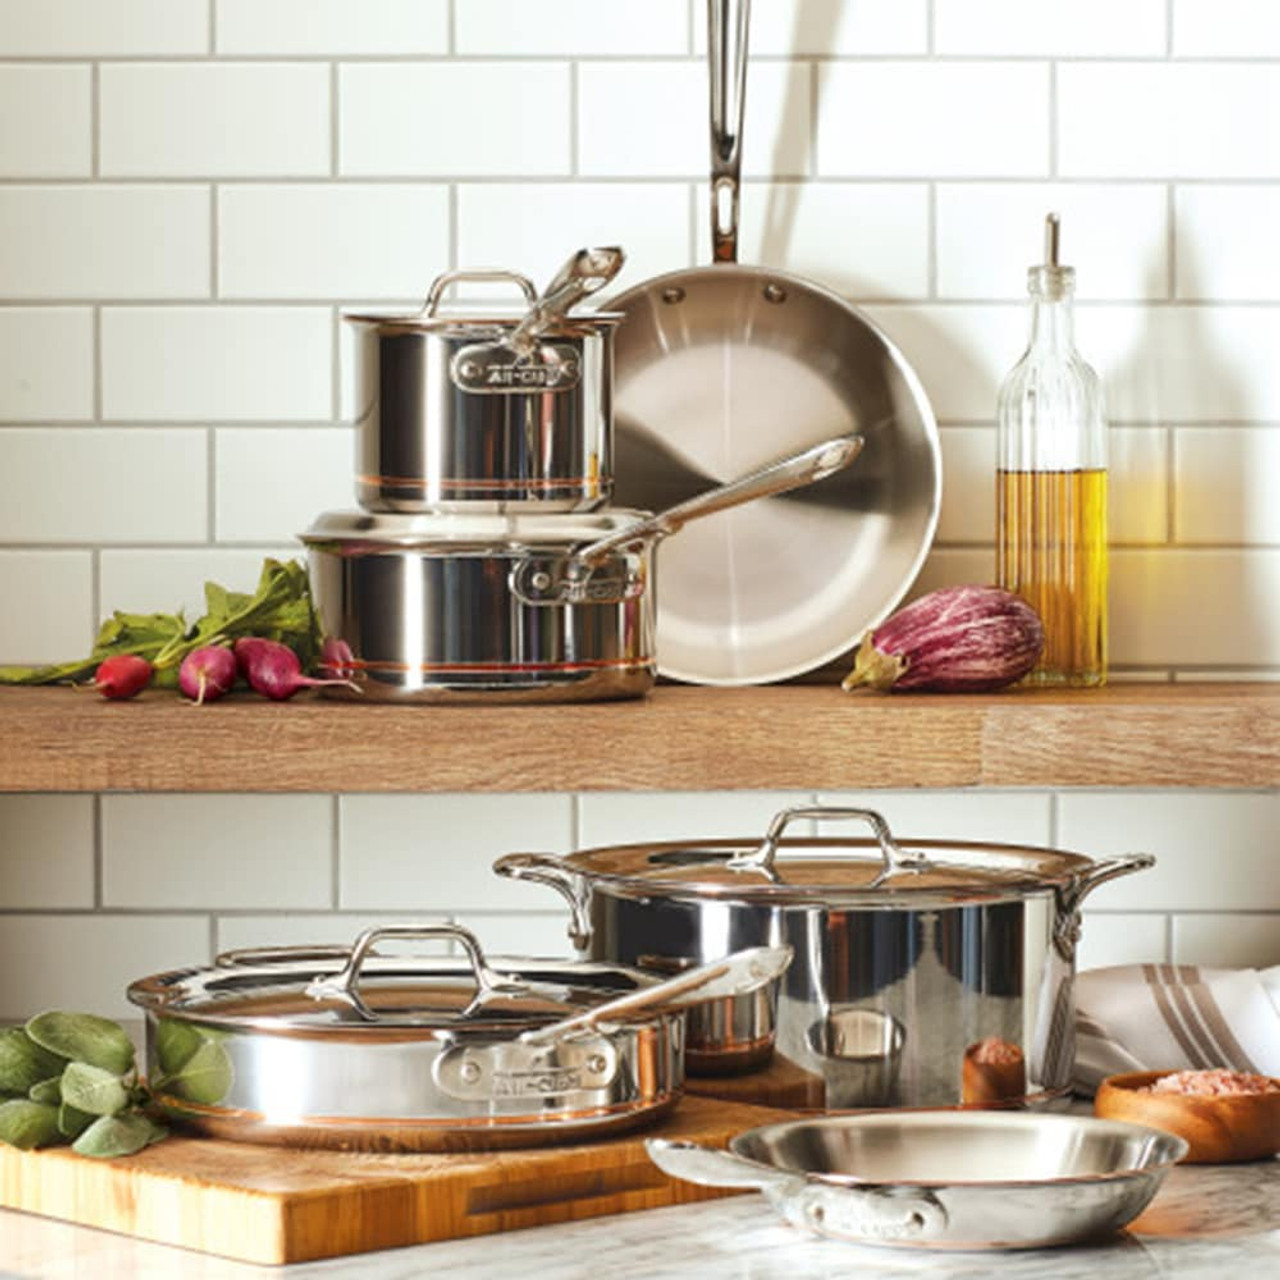 https://cdn11.bigcommerce.com/s-hccytny0od/images/stencil/1280x1280/products/506/1922/all-clad-copper-core-10-piece-cookware-set-2__39248.1531570450.jpg?c=2?imbypass=on